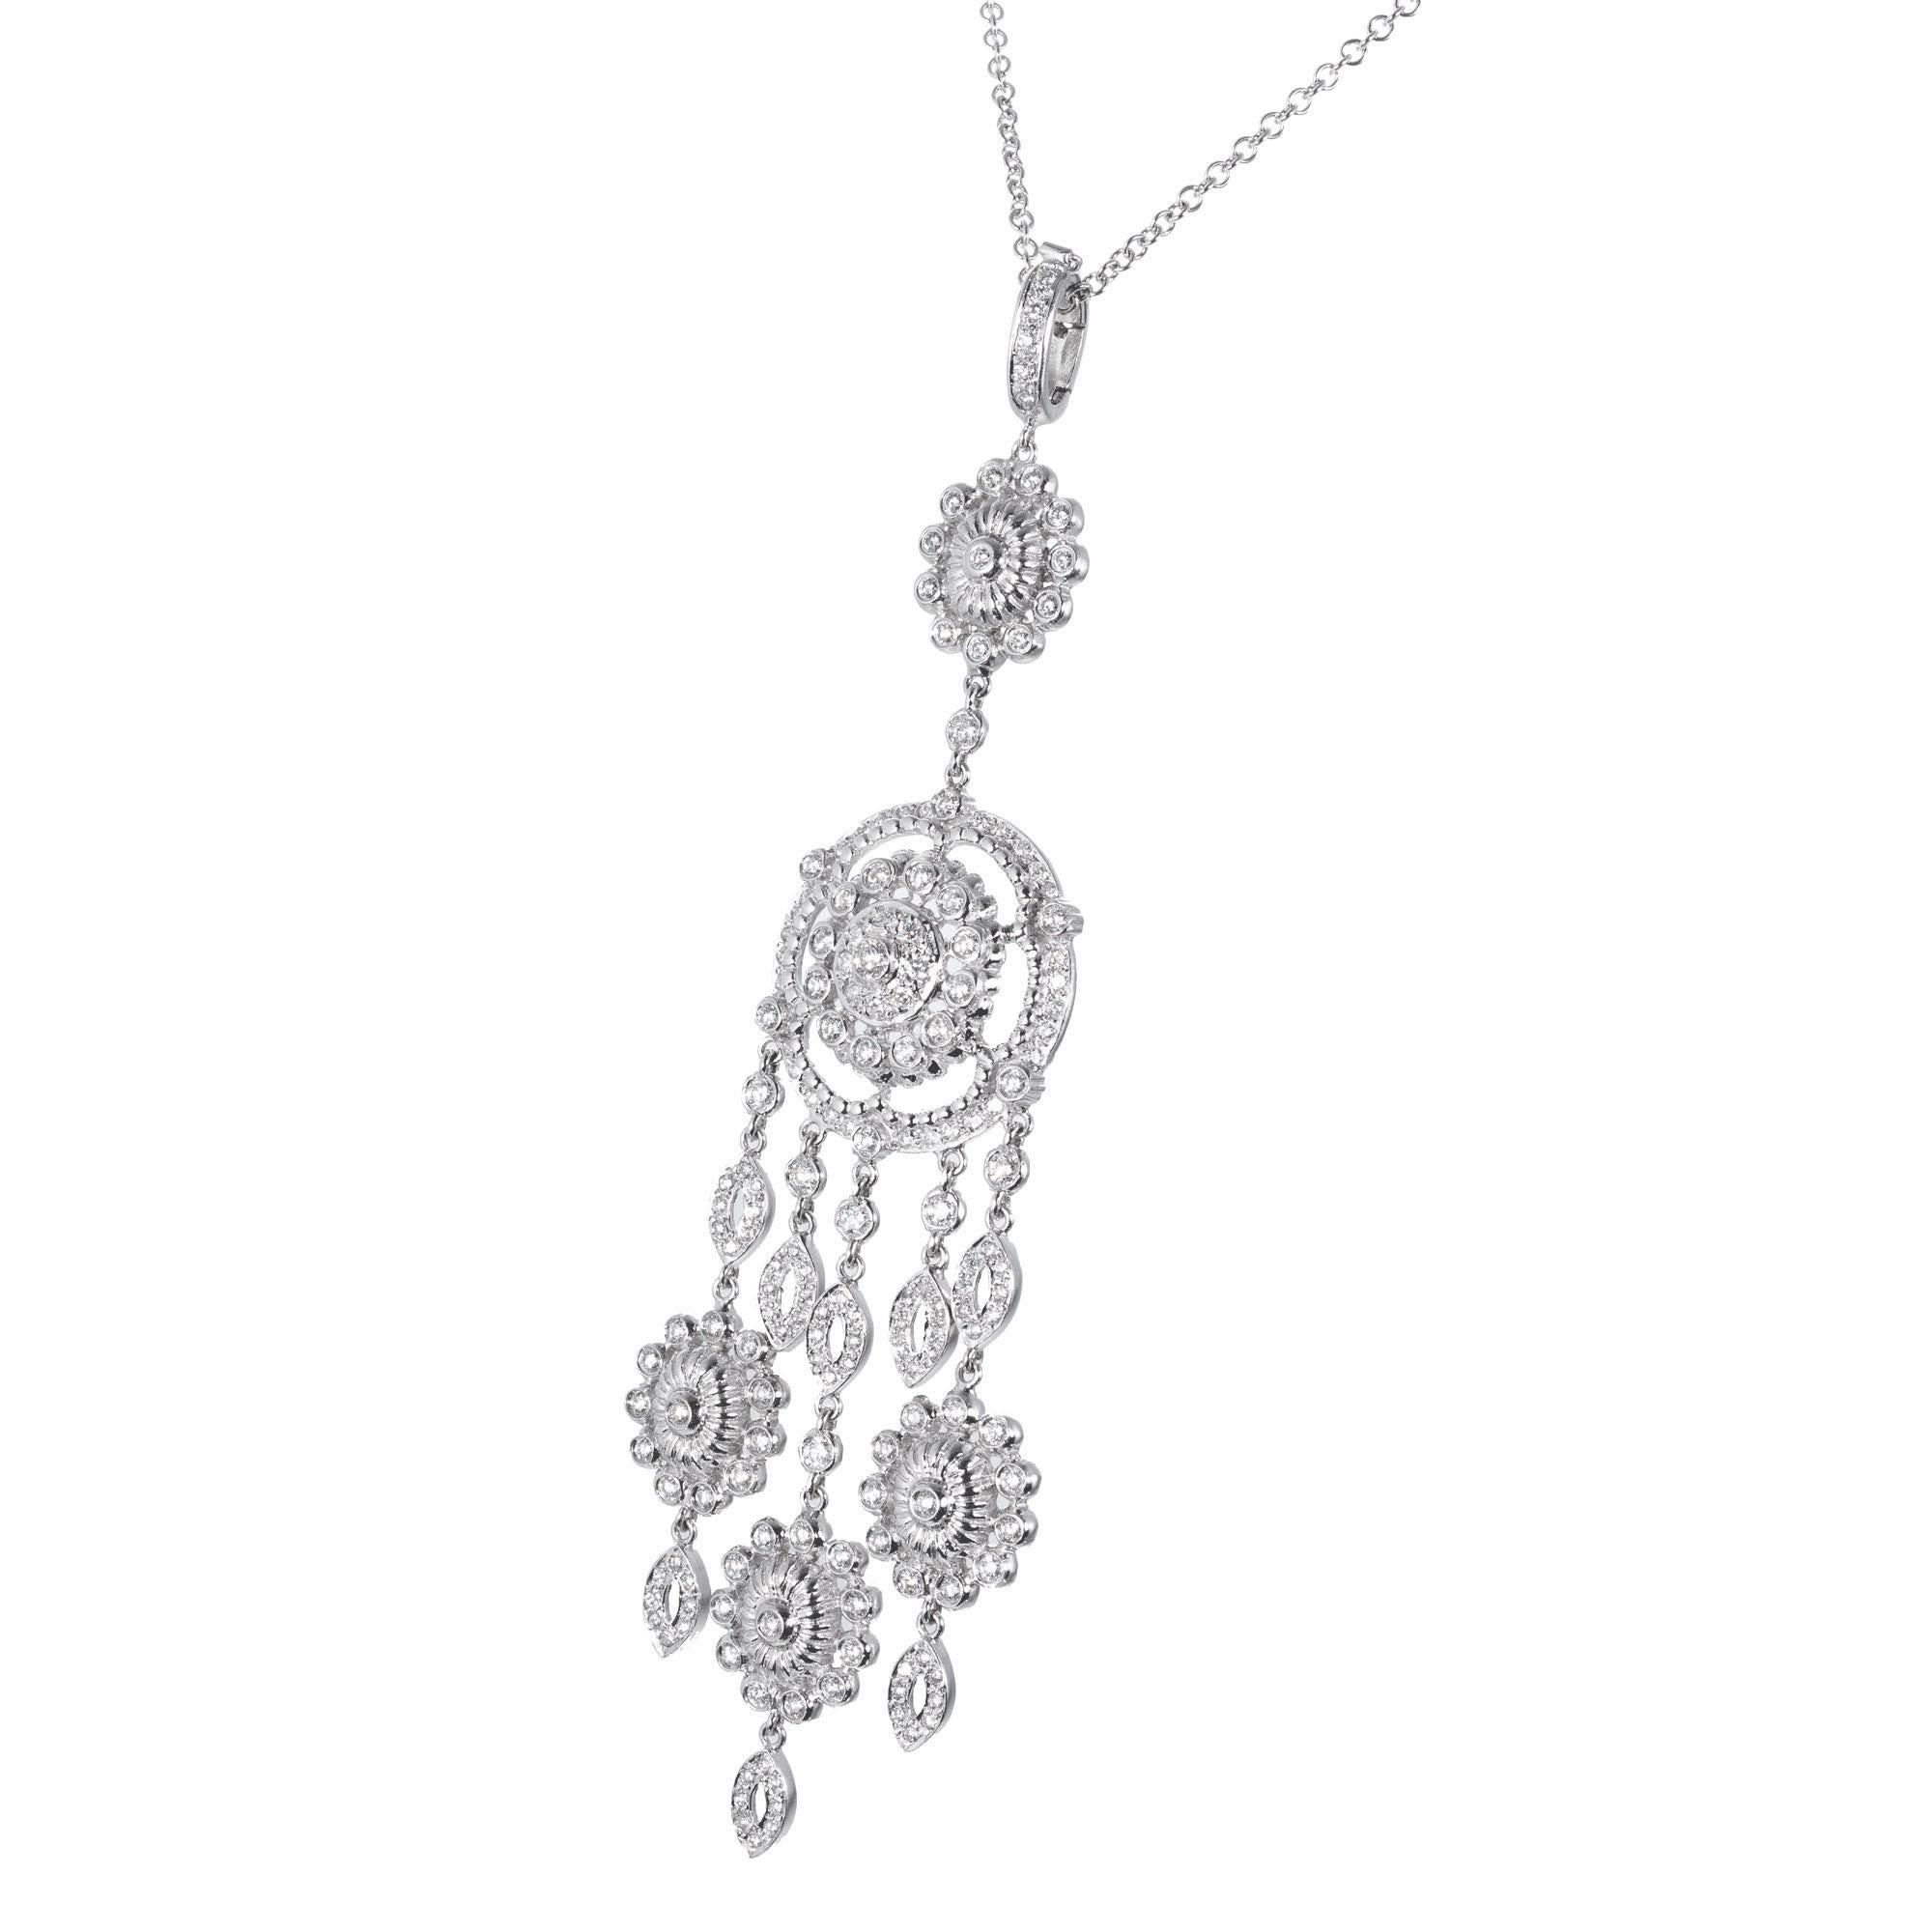 Doris Panos diva Anastasia chandelier drop pendant necklace with 3.6 carats of round diamonds. 18k white gold chain. 

172 round brilliant cut diamonds G, VS, approx. 3.60cts
18k white gold
Stamped: 18k 
Hallmark: DP C200
28.1 grams
Top to bottom: 4